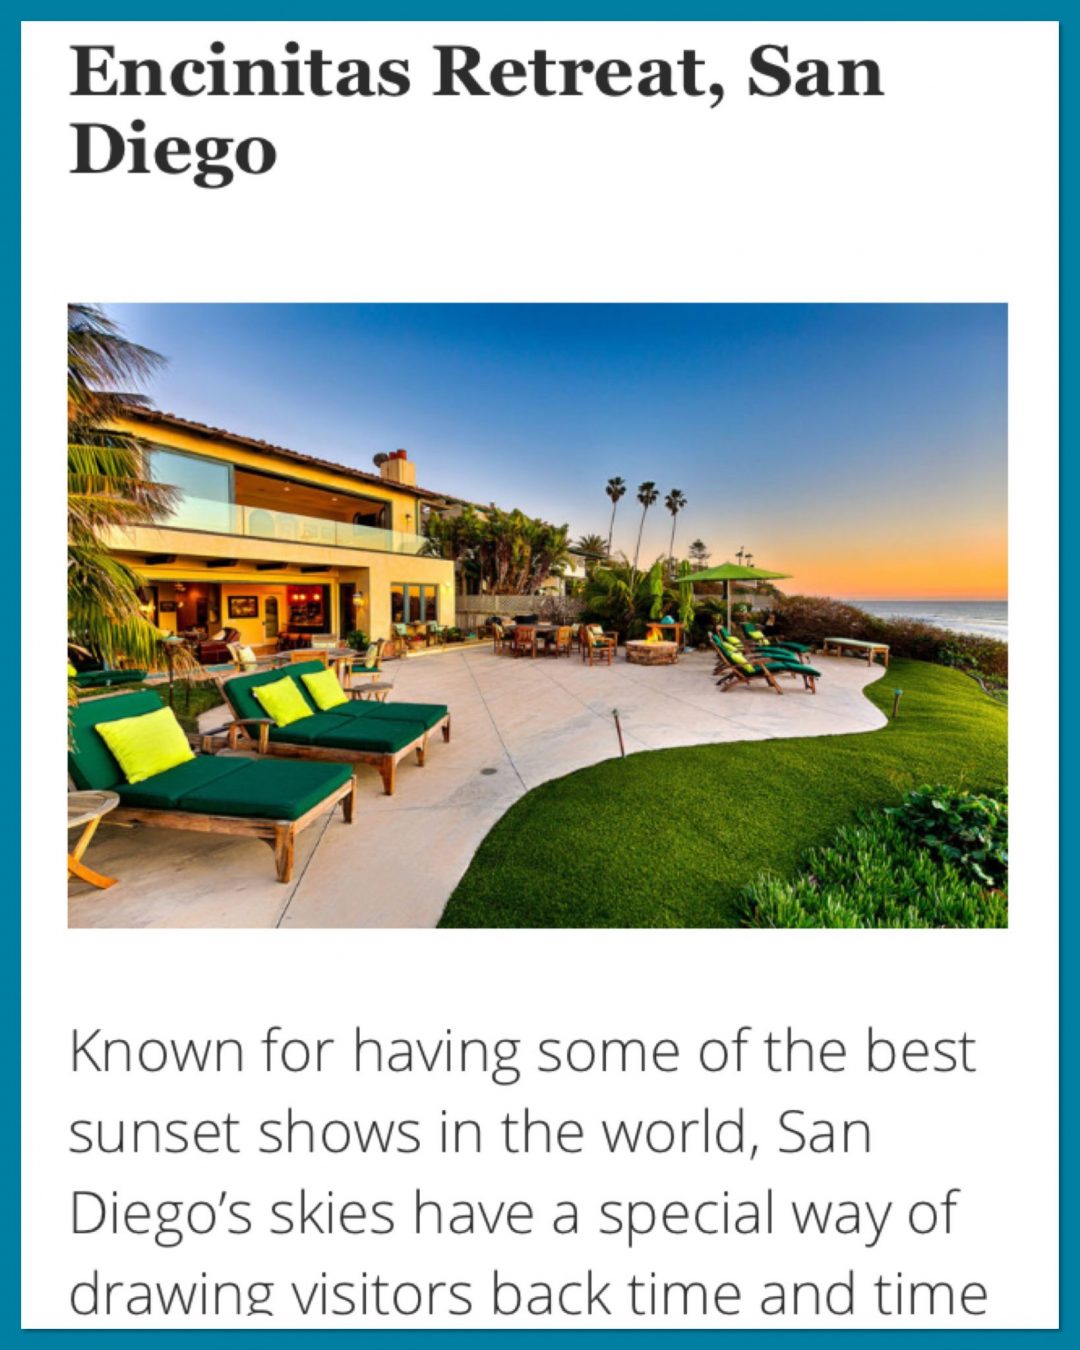 San Diego luxury beach front property and sunset I dream of for ending our Route 1 road trip - screenshot of Luxury Retreats Magazine